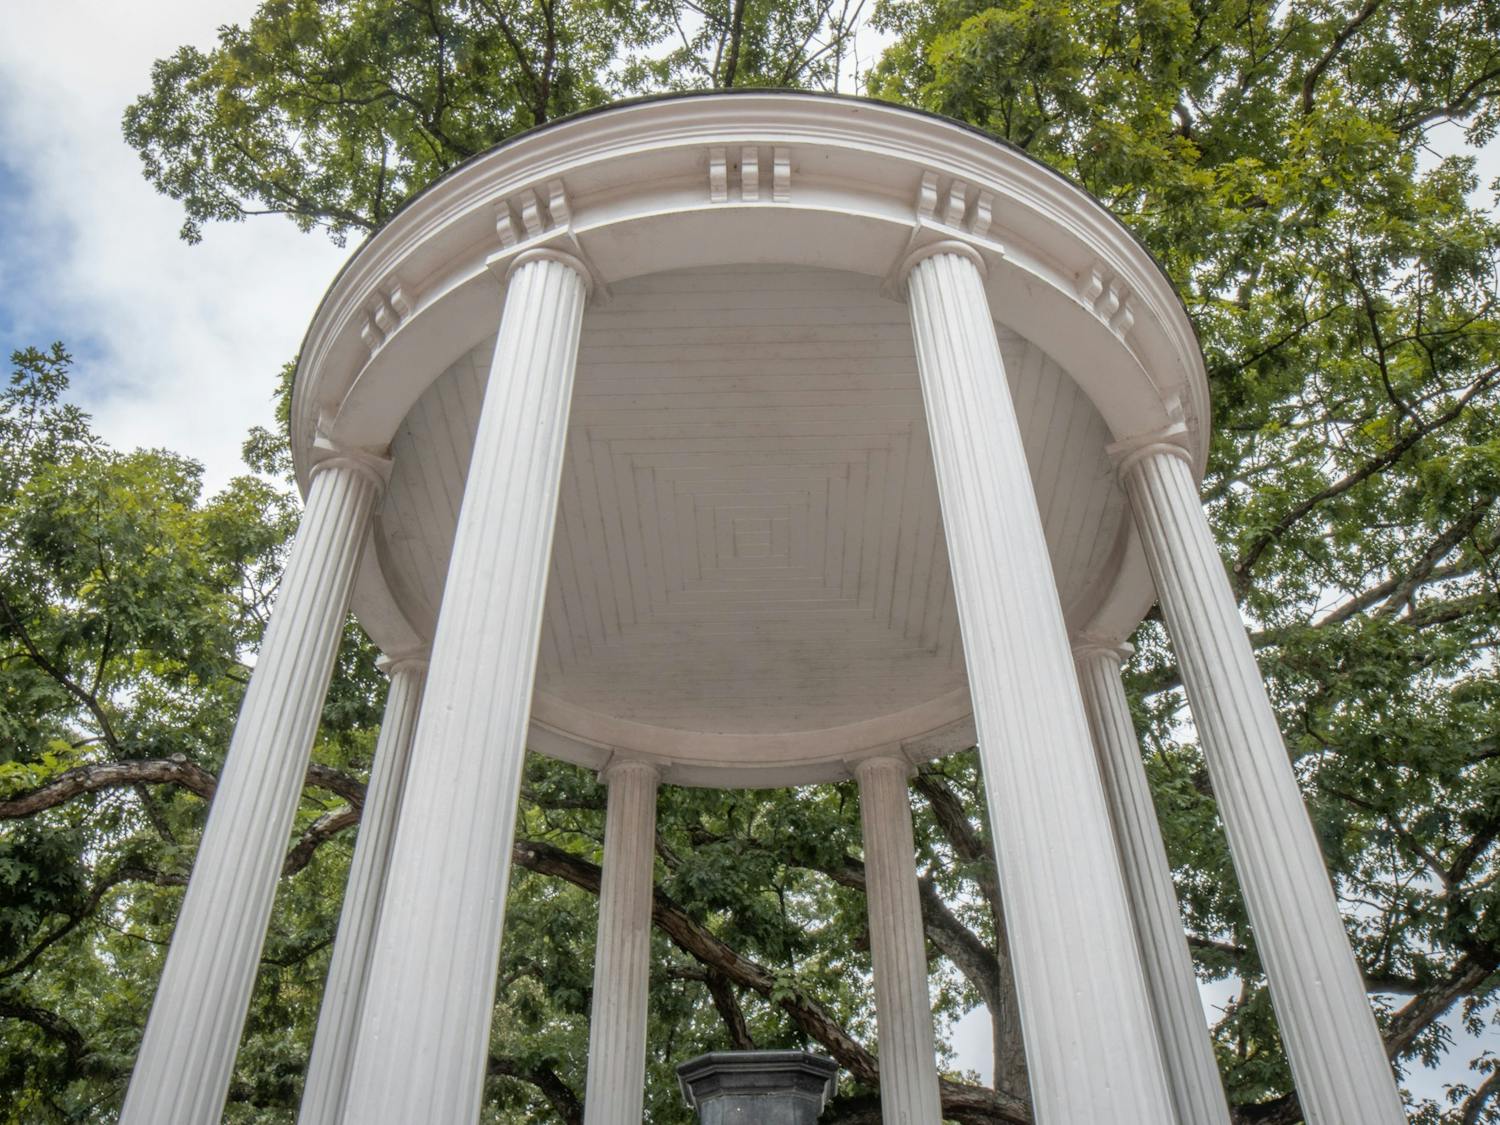 The Old Well stands on Oct. 11, 2021.